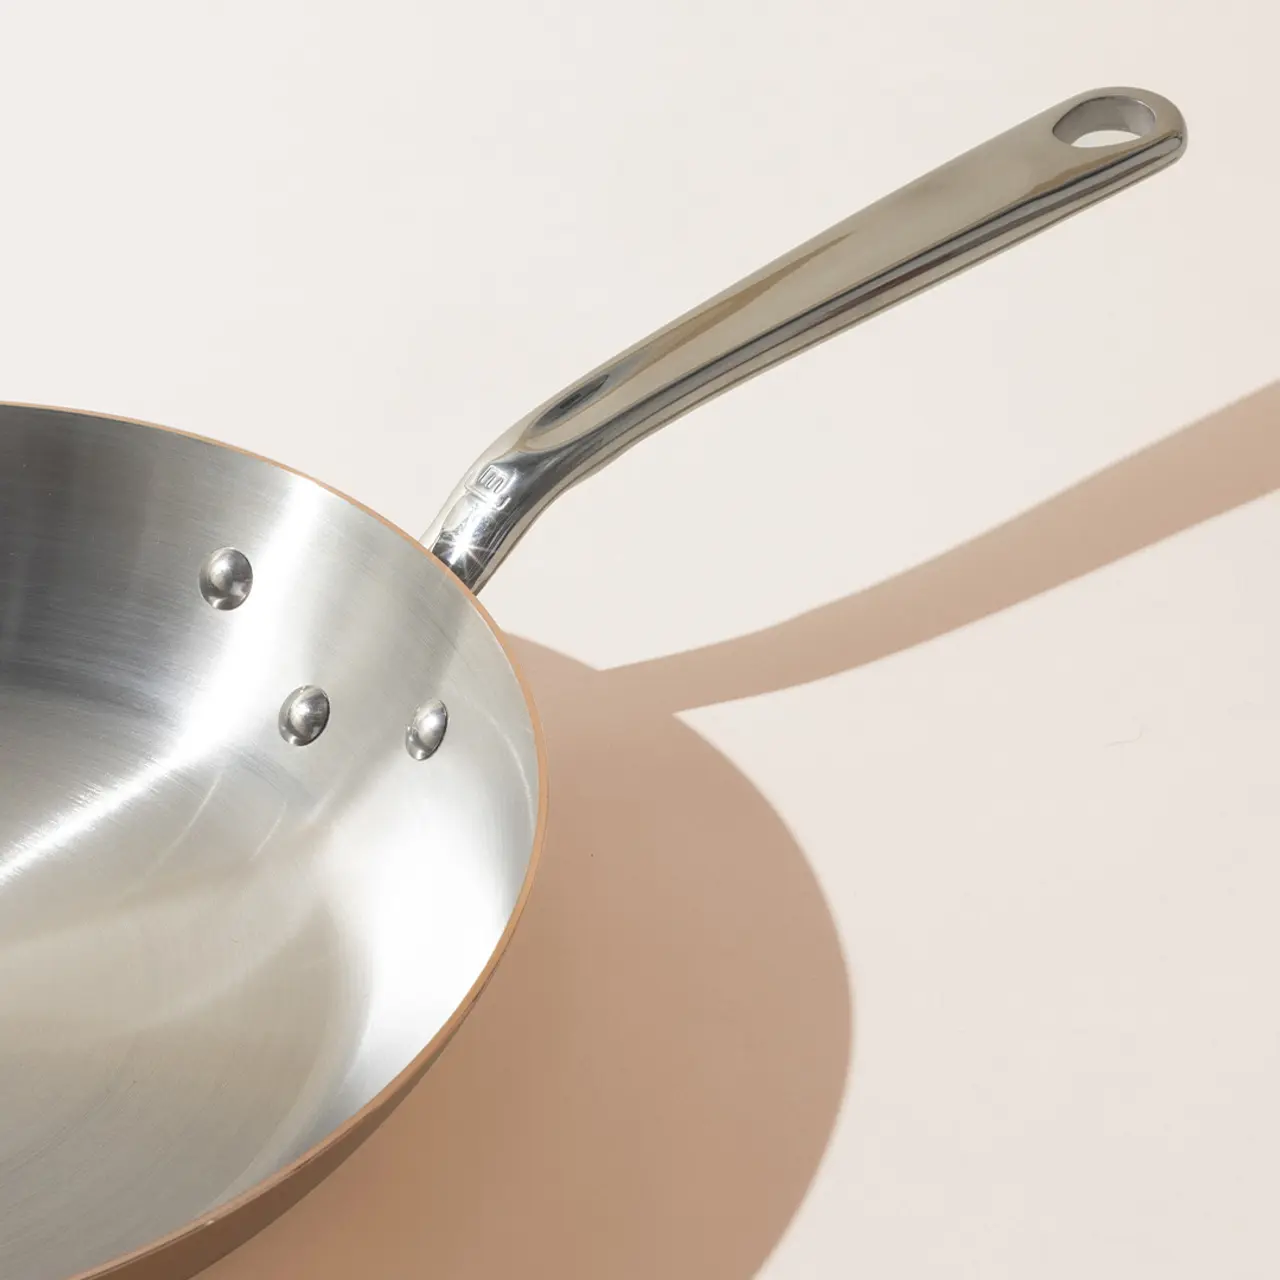 A stainless steel frying pan casting a shadow on a light surface.